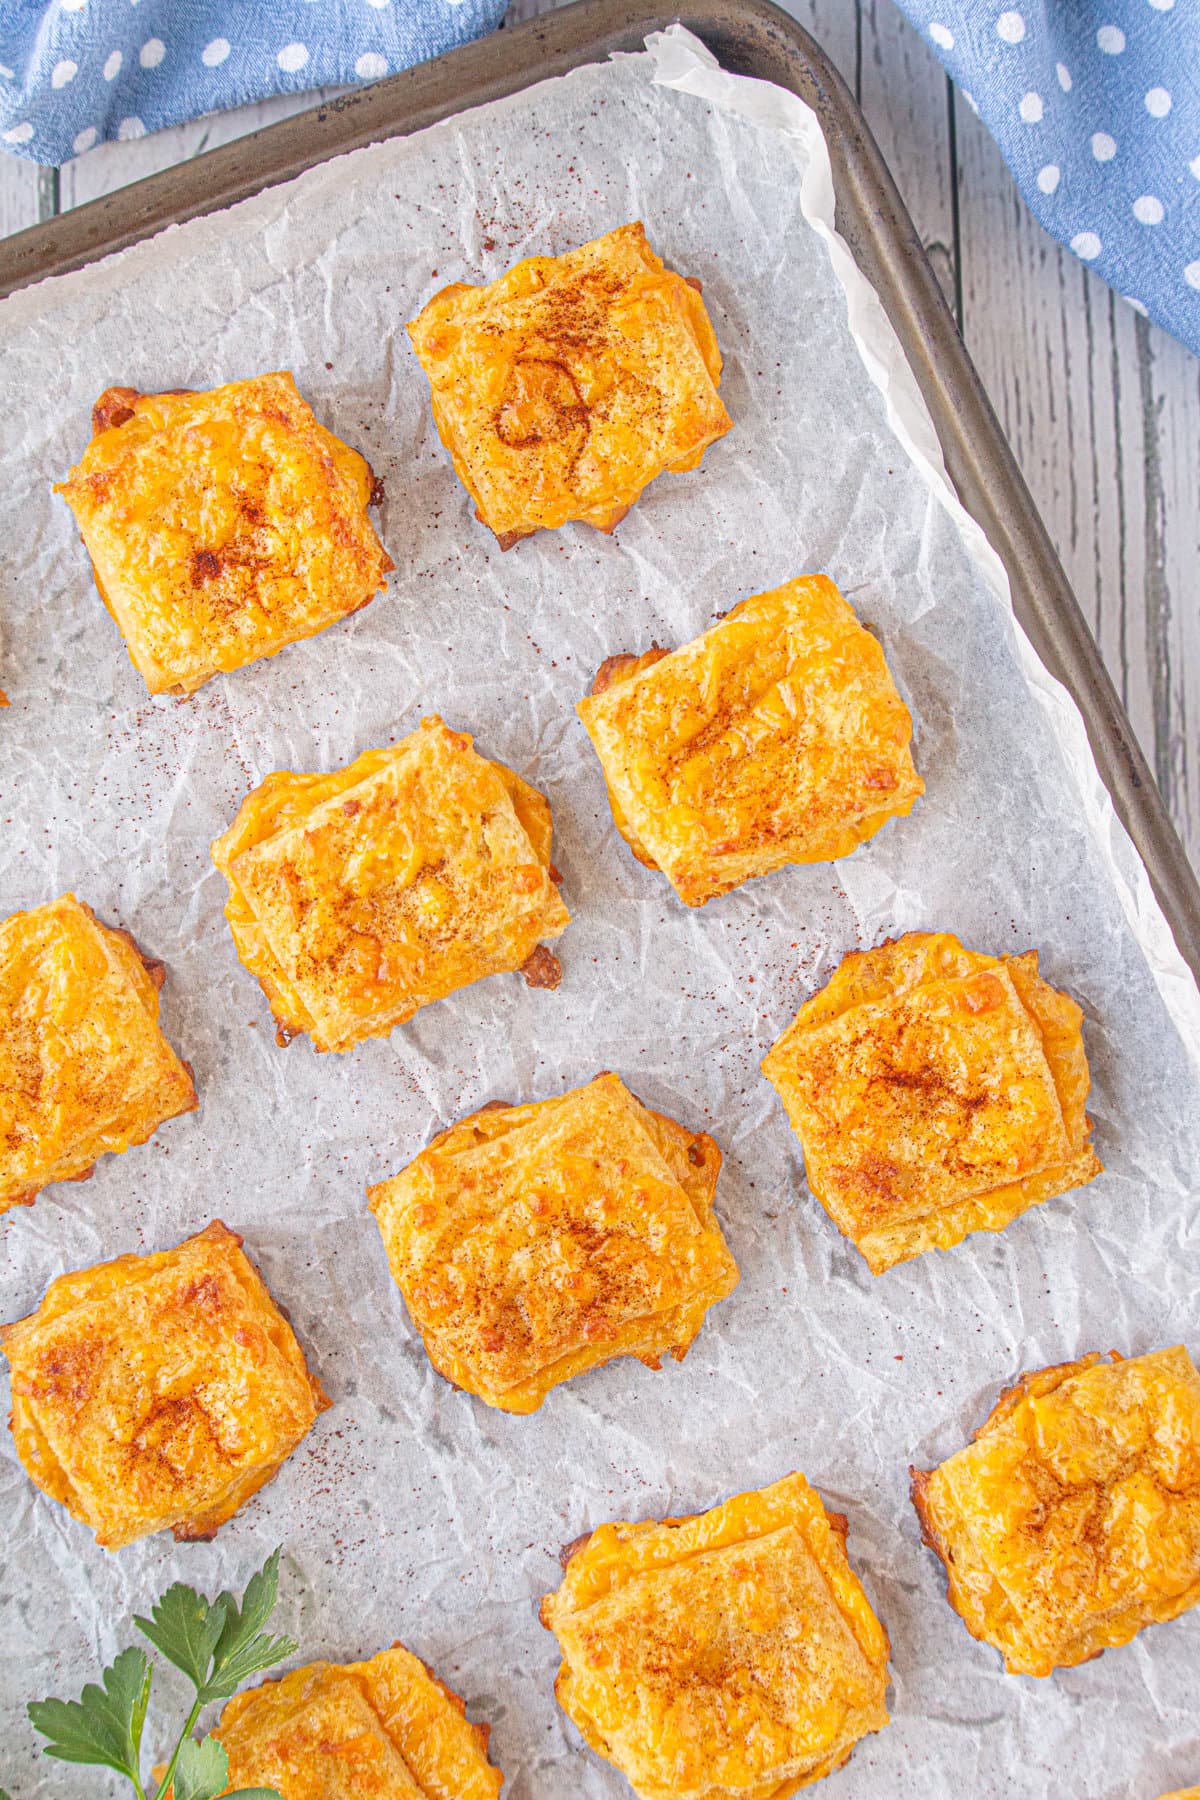 An overhead view of baked cheese dreams on a baking sheet.